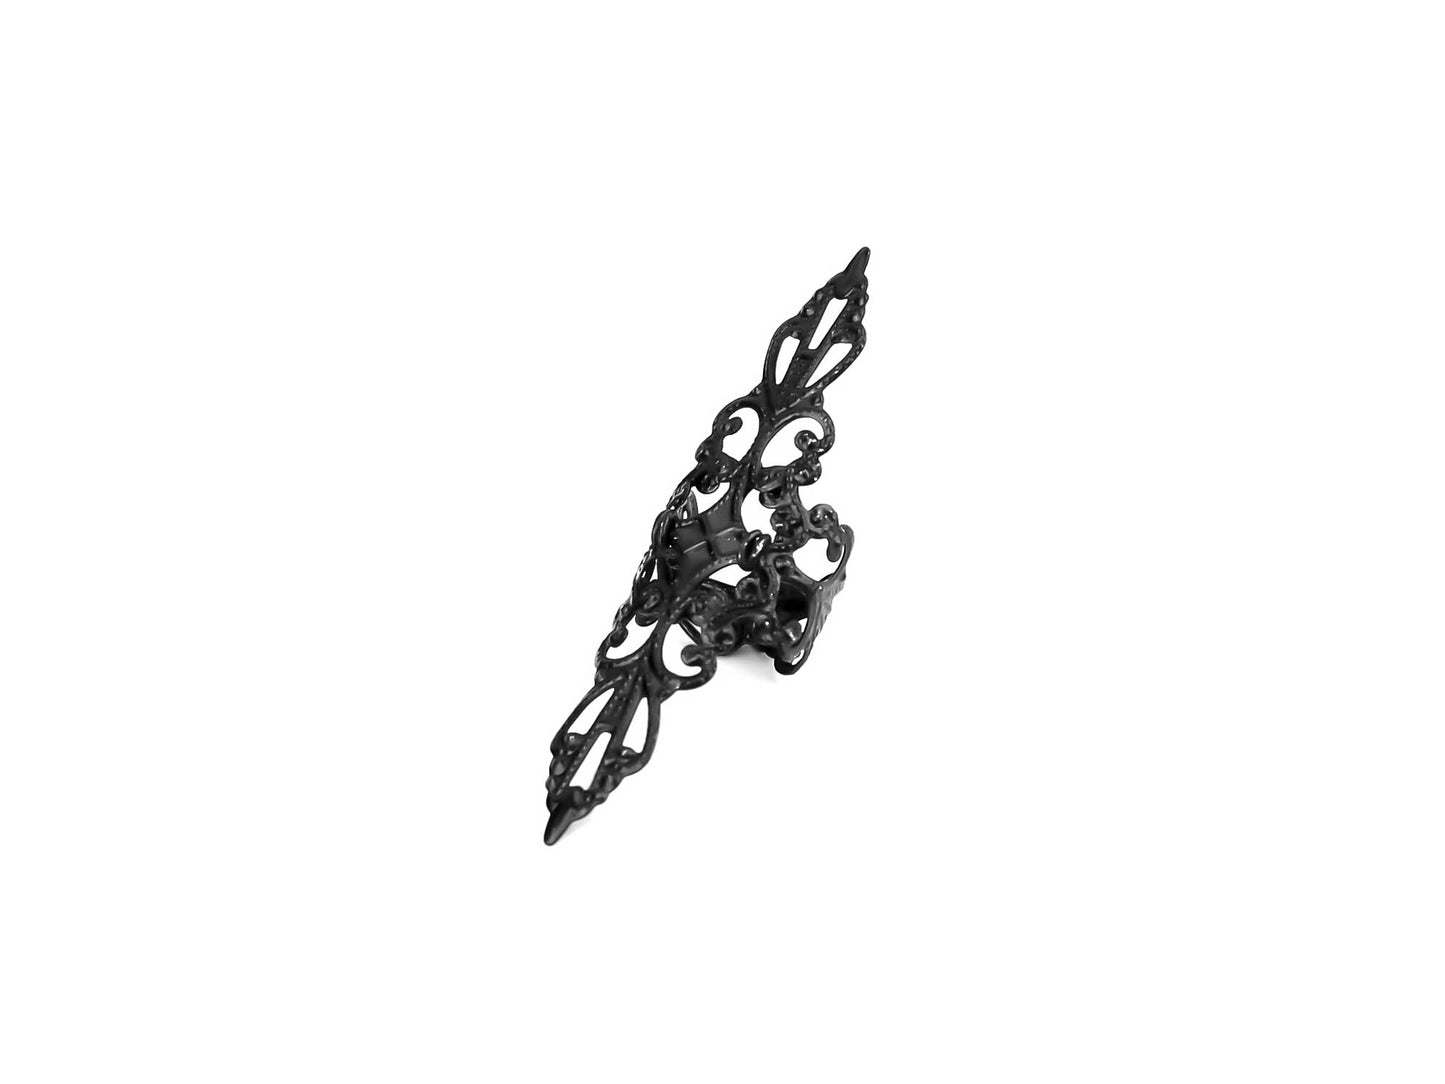 Intricate gothic filigree design adds an elegant touch to this black armor ring, making it a bold choice for gothic or avant-garde jewelry.